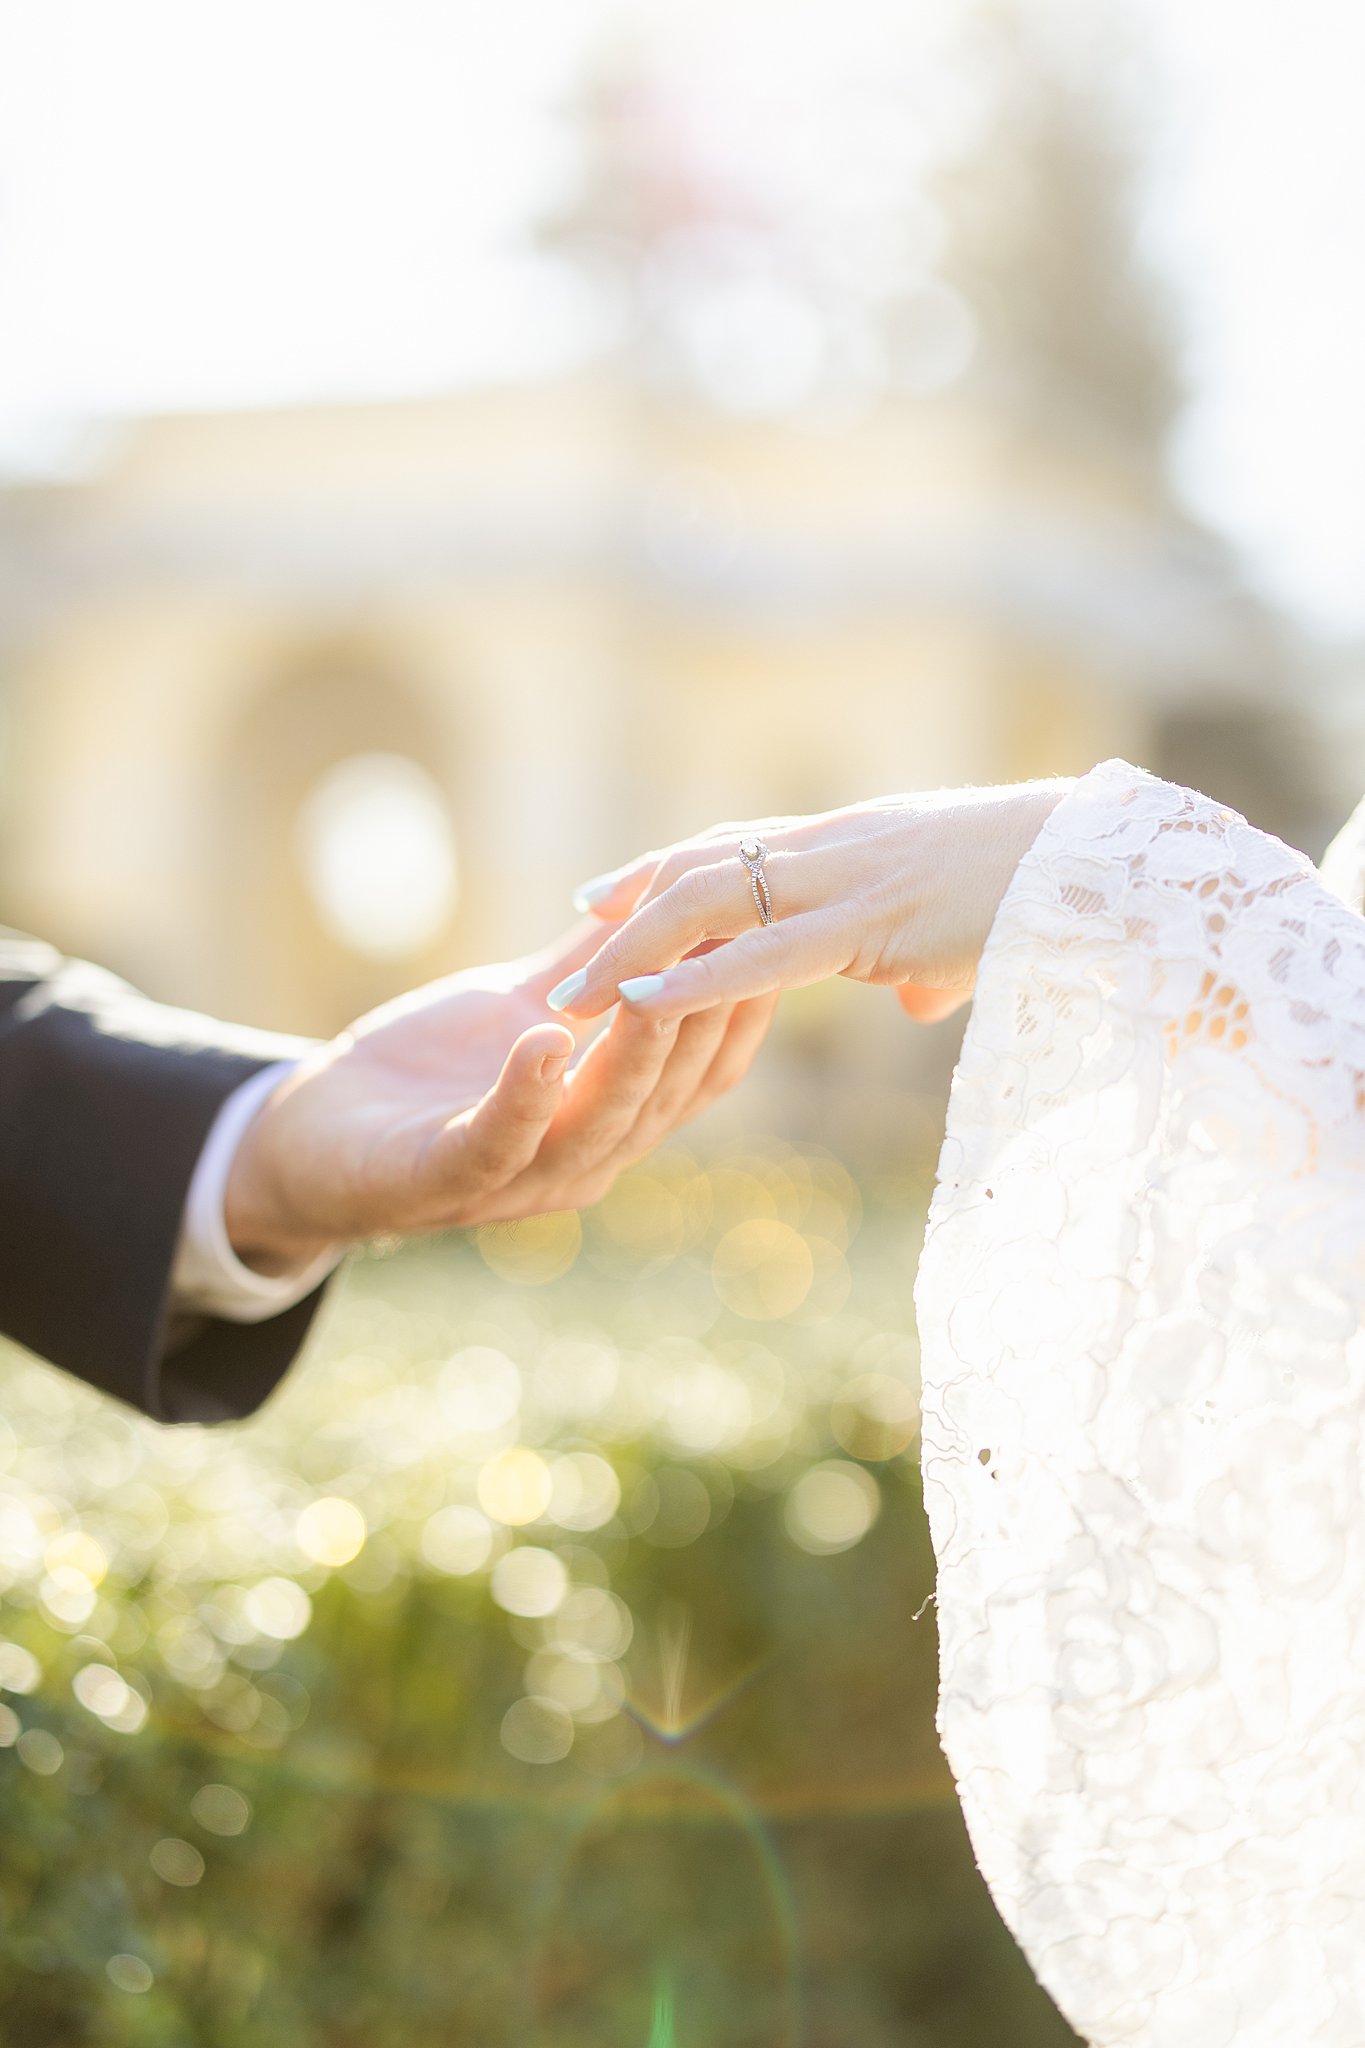 Newlyweds hold hands outside in a lace dress